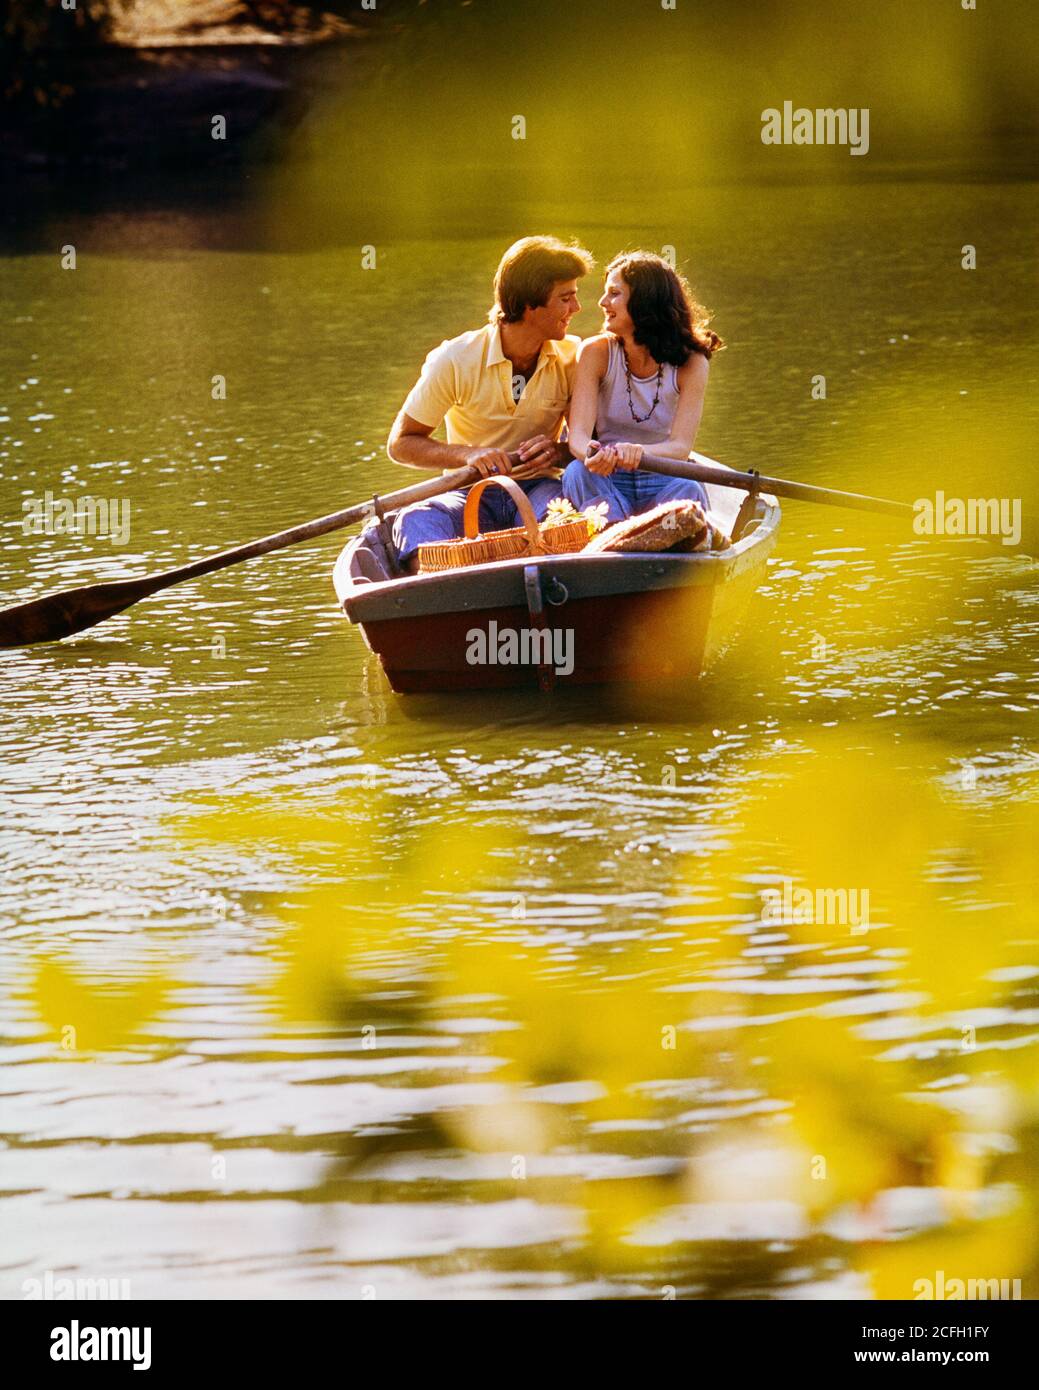 1970s ROMANTIC COUPLE MAN WOMAN SIDE-BY-SIDE IN ROWBOAT WITH PICNIC BASKET SOFT FOCUS GRAPHIC EFFECT CENTRAL PARK NYC USA - kb10981 PHT001 HARS SOFT SILLY COMMUNICATION YOUNG ADULT COMIC SEXY TEAMWORK STRONG CENTRAL JOY LIFESTYLE FEMALES MARRIED RURAL SPOUSE HUSBANDS HEALTHINESS UNITED STATES COPY SPACE FRIENDSHIP HALF-LENGTH LADIES PERSONS UNITED STATES OF AMERICA CARING MALES FOCUS PARTNER DATING DREAMS HUMOROUS HAPPINESS EXCITEMENT RECREATION COMICAL ATTRACTION NYC RELATIONSHIPS ROWBOAT COURTSHIP CONCEPTUAL NEW YORK CITIES COMEDY NEW YORK CITY PERSONAL ATTACHMENT POSSIBILITY AFFECTION Stock Photo